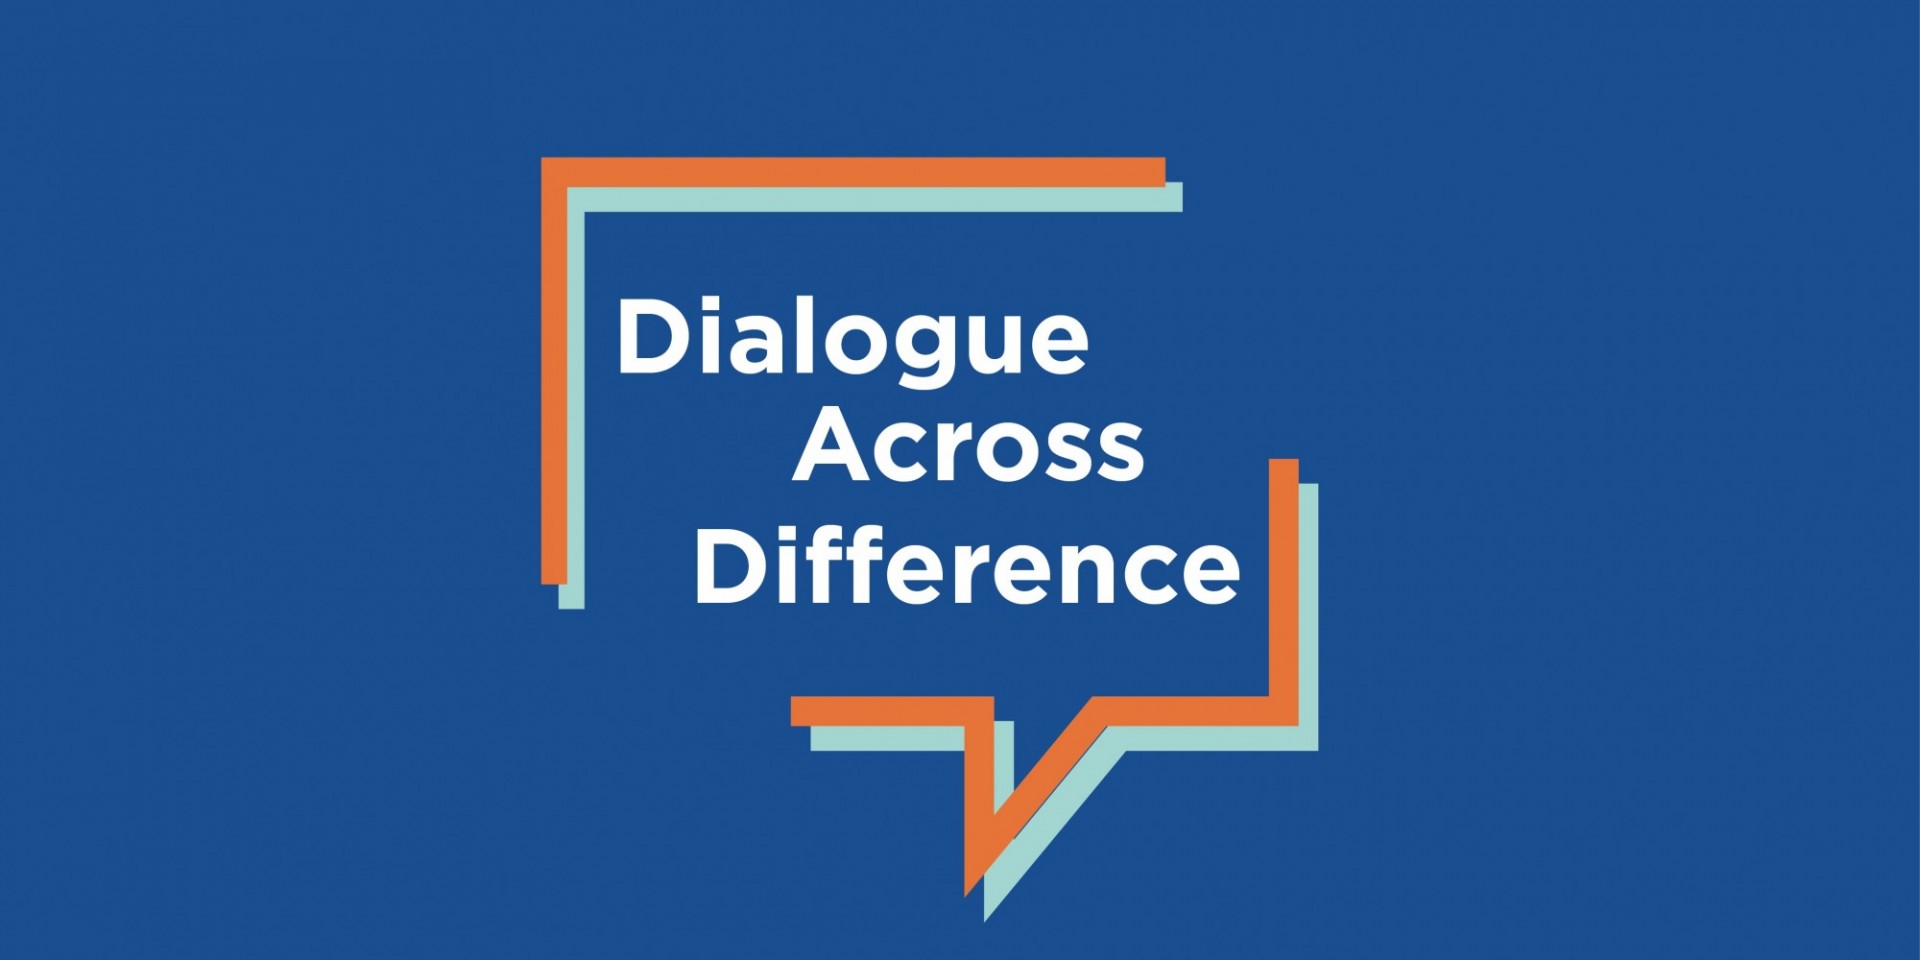 Logo for Columbia University's Dialogue Across Difference initiative. Dialogue Across Difference appears in white text located inside a rectangular orange and green speech bubble.